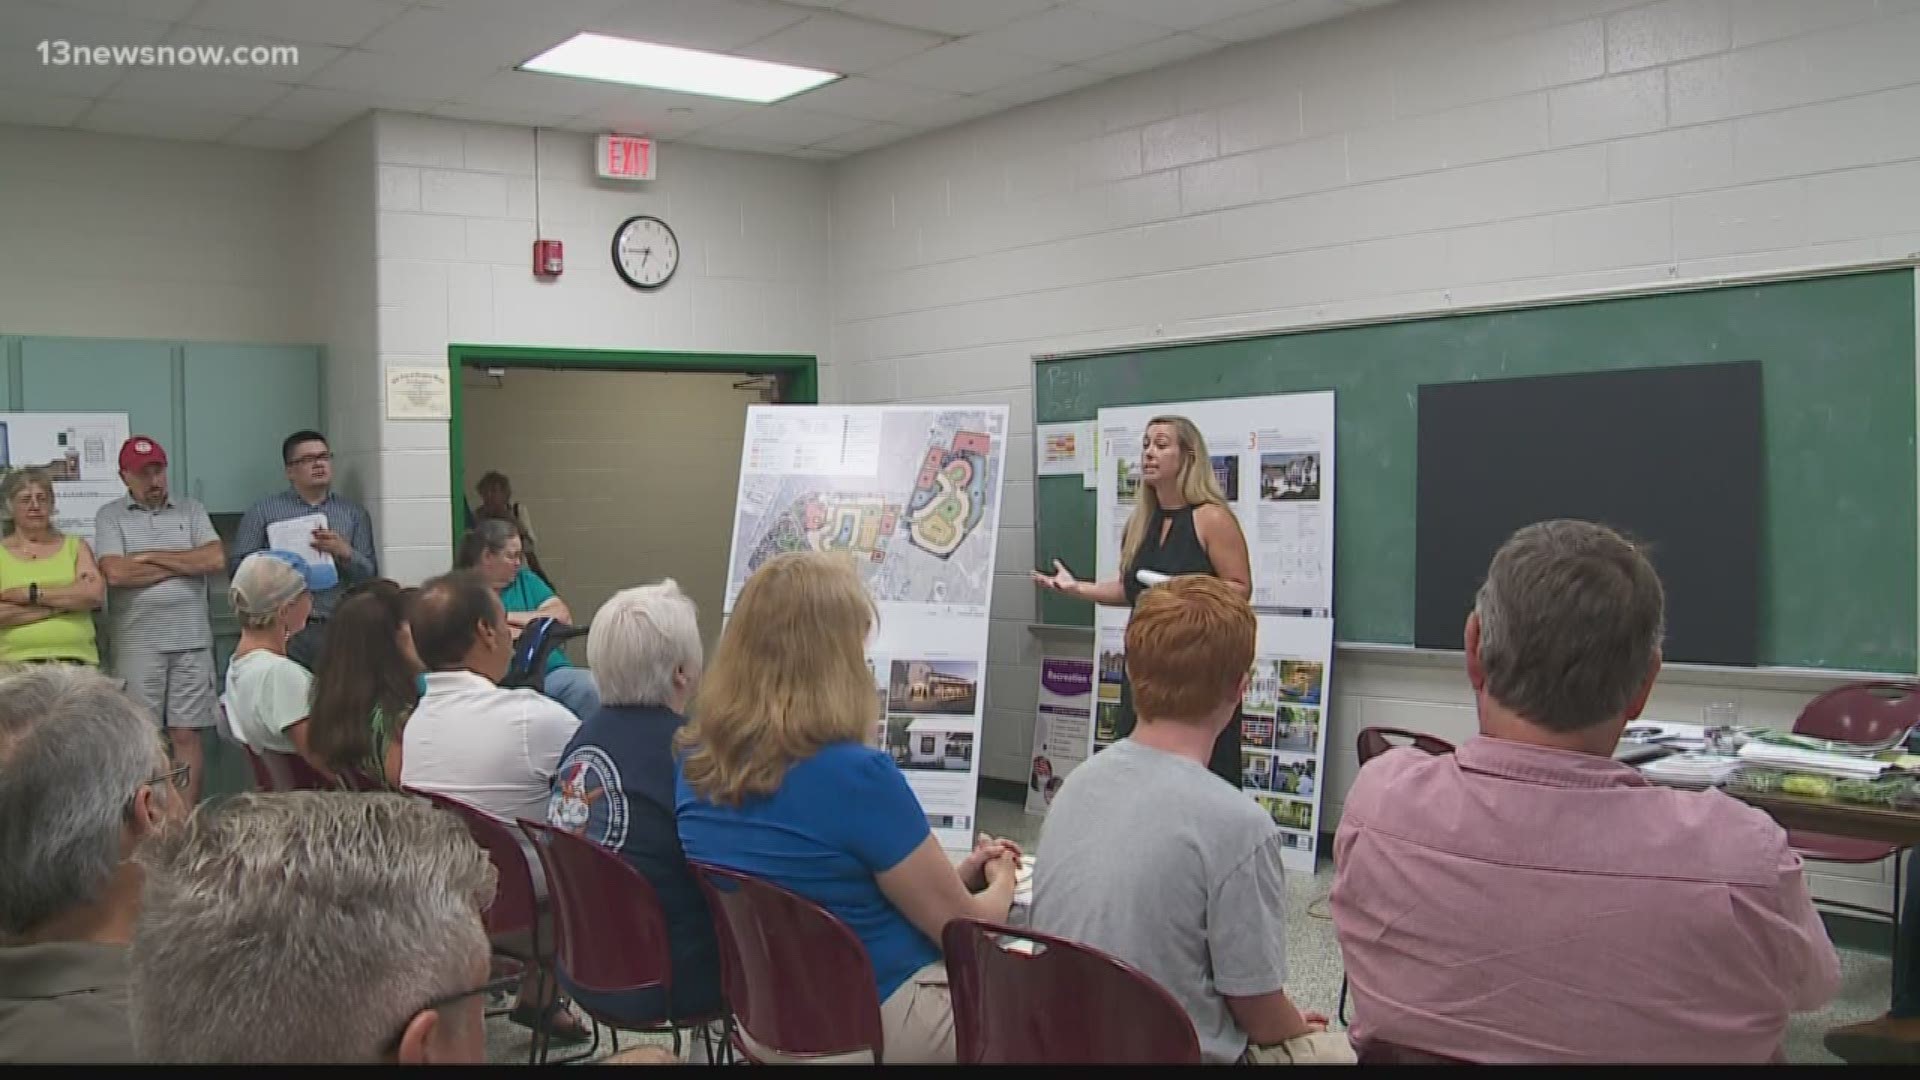 A community in Virginia Beach is concerned that over 100 units will be developed in their neighborhood.